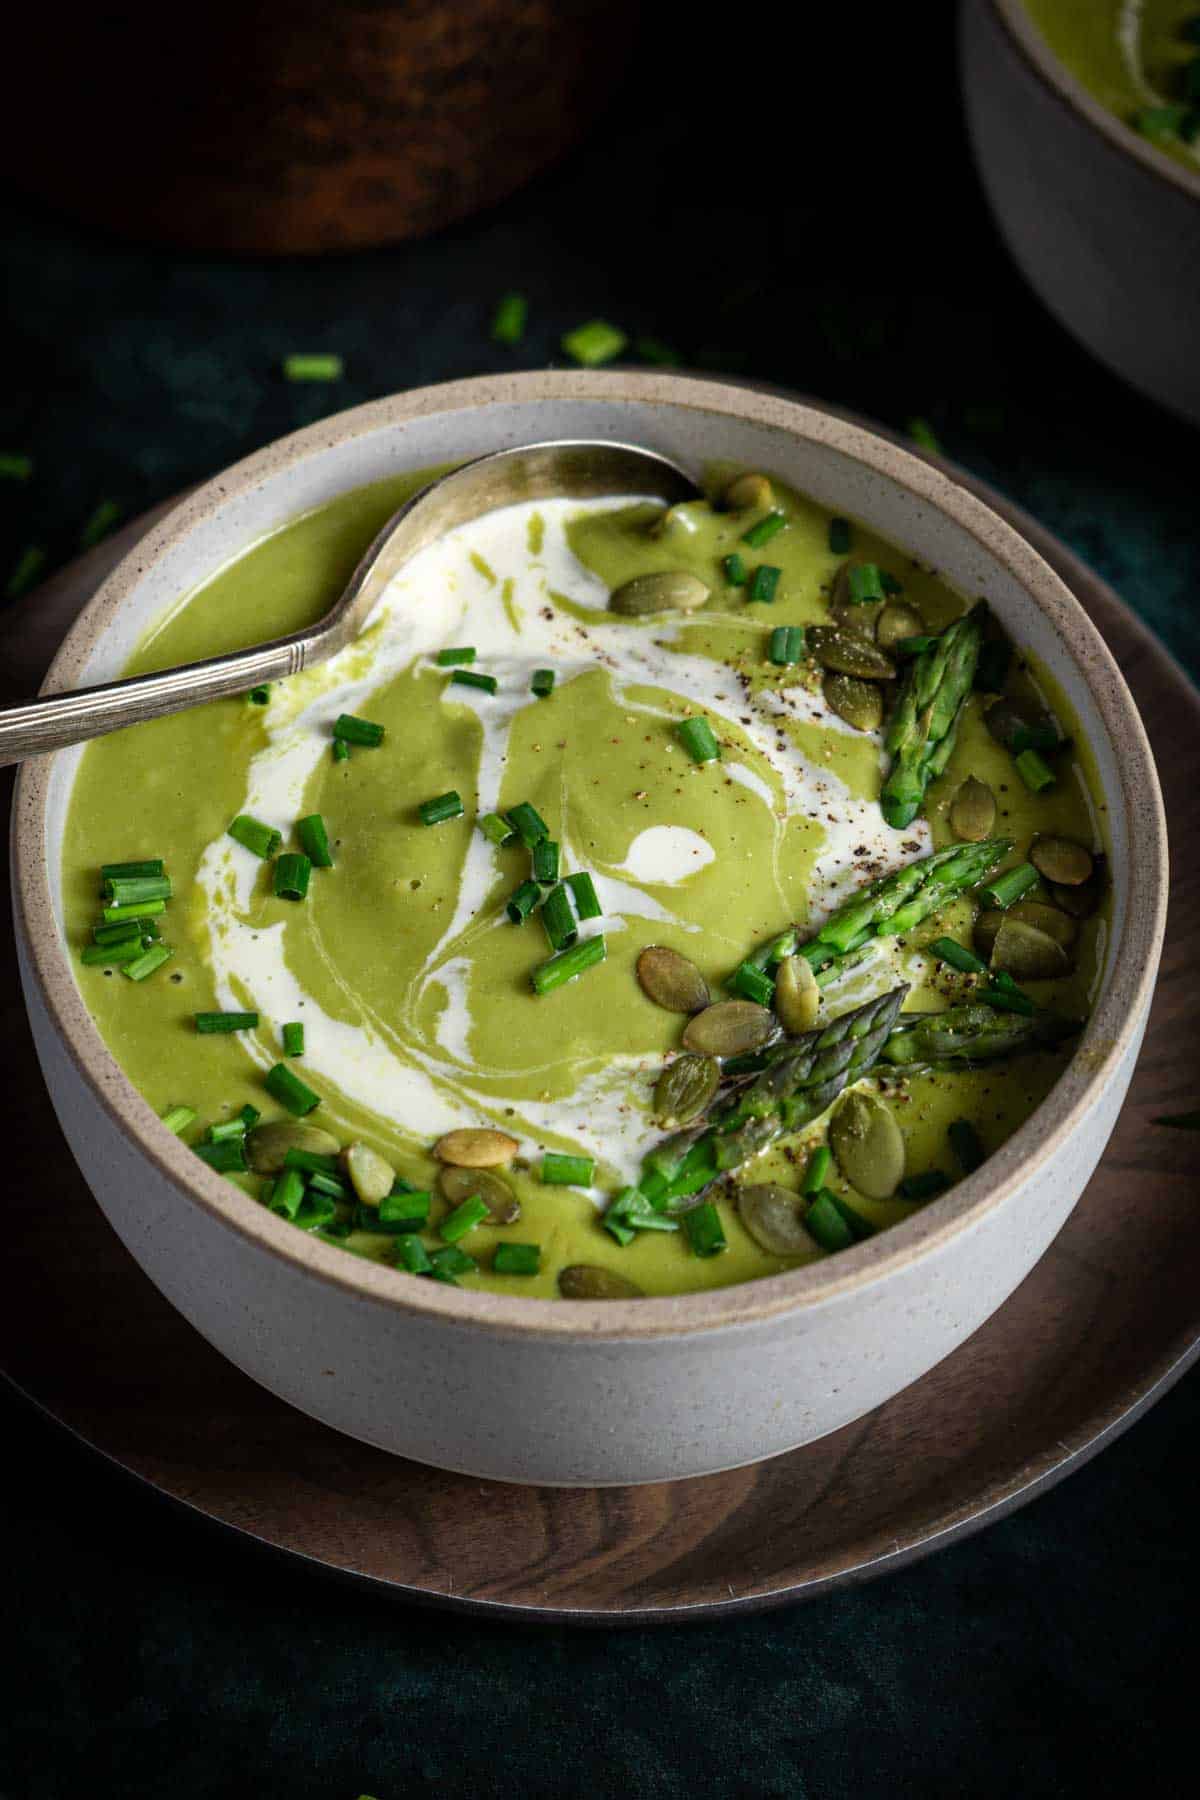 Green soup topped with chives in a bowl with a spoon.